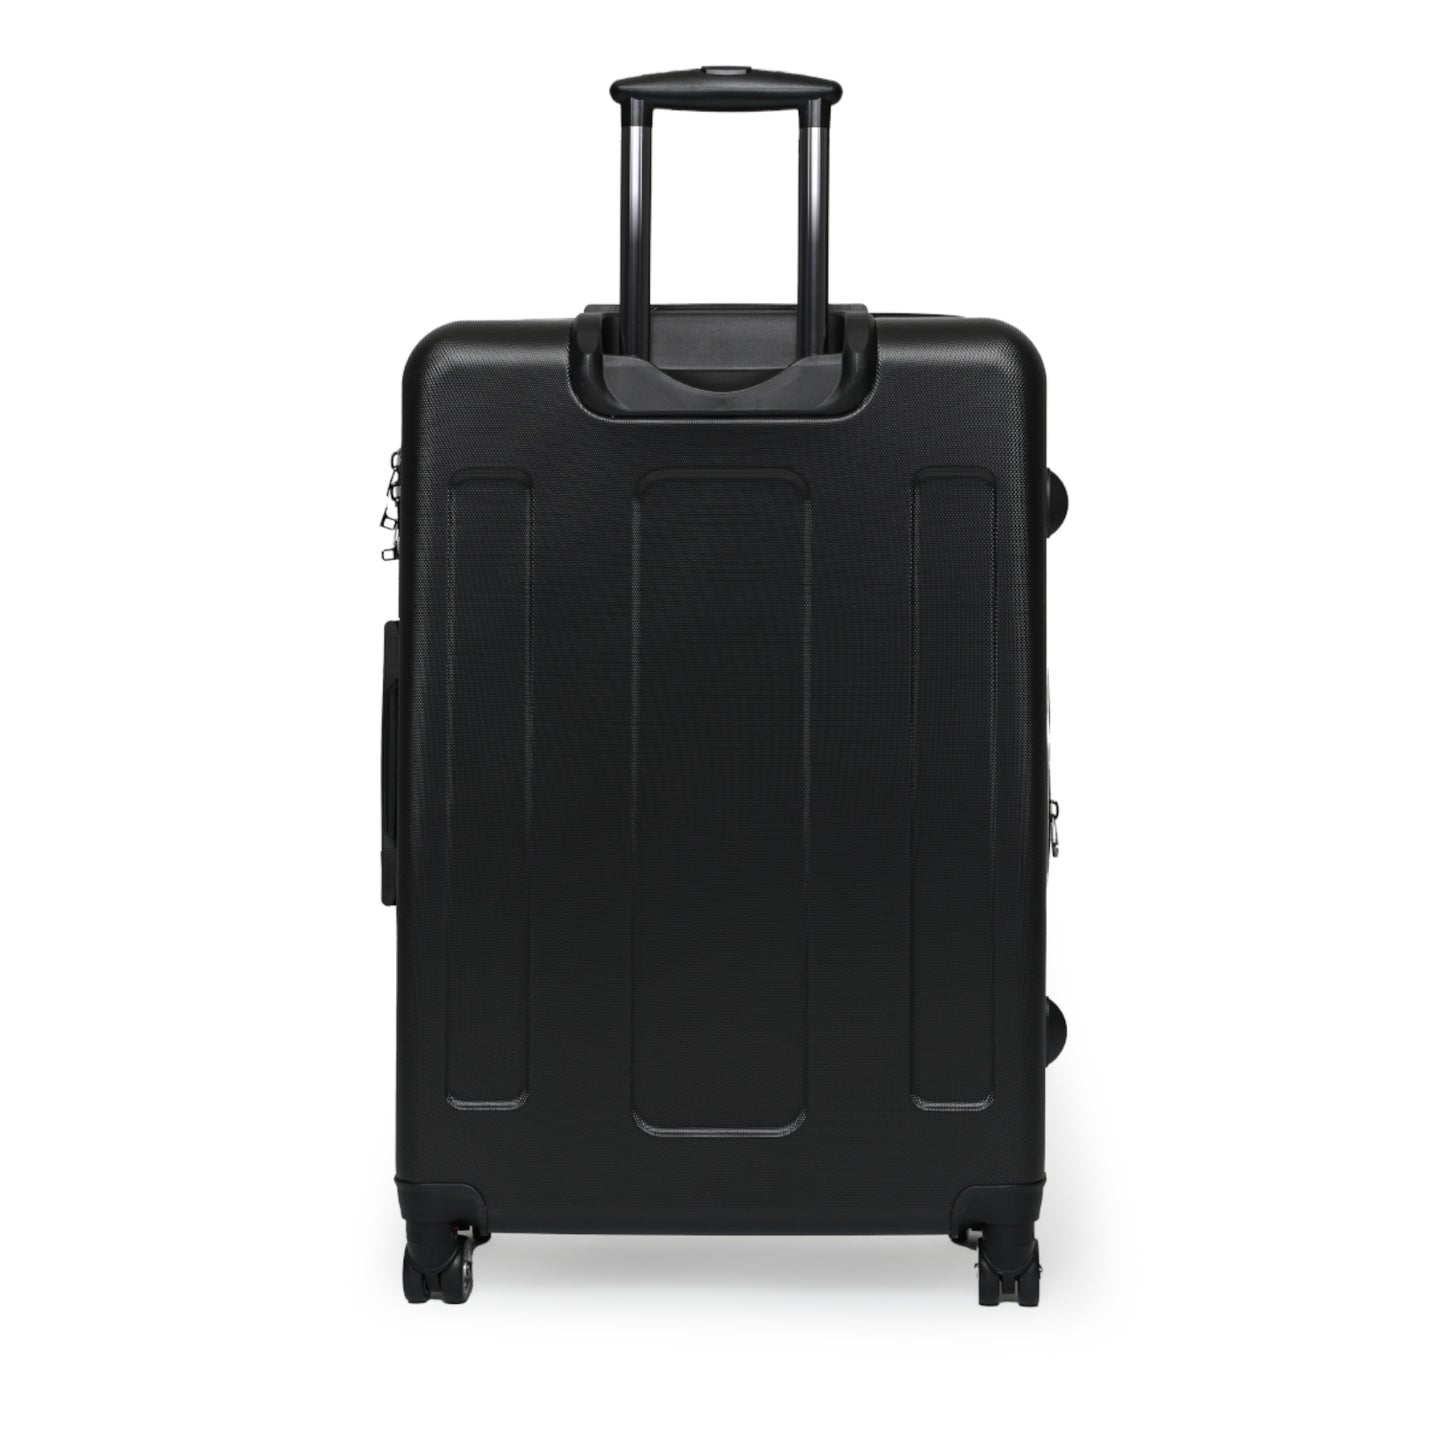 "House on a Hill" Carry on Suitcase (+ 2 Sizes)